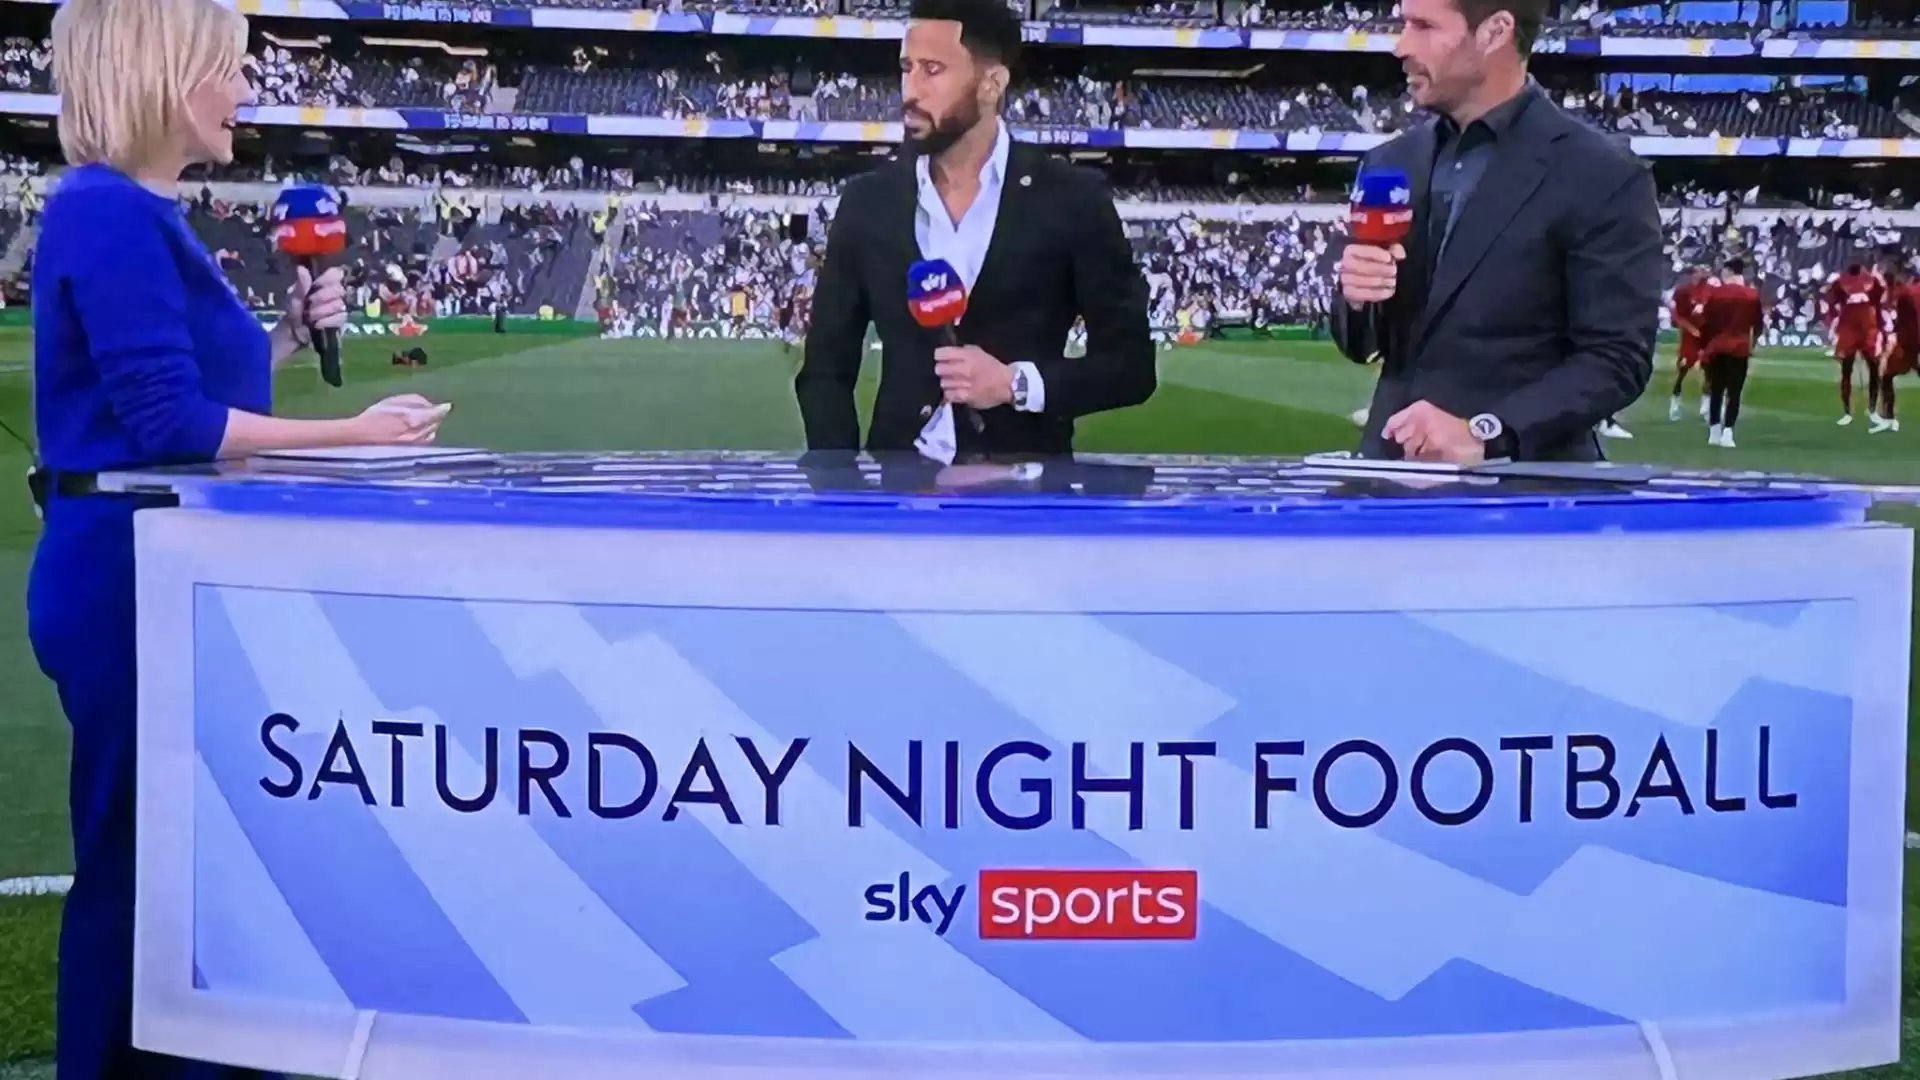 Fans angry as Sky Sports misses second-half kick-off in Tottenham Hotspur vs. Liverpool football match